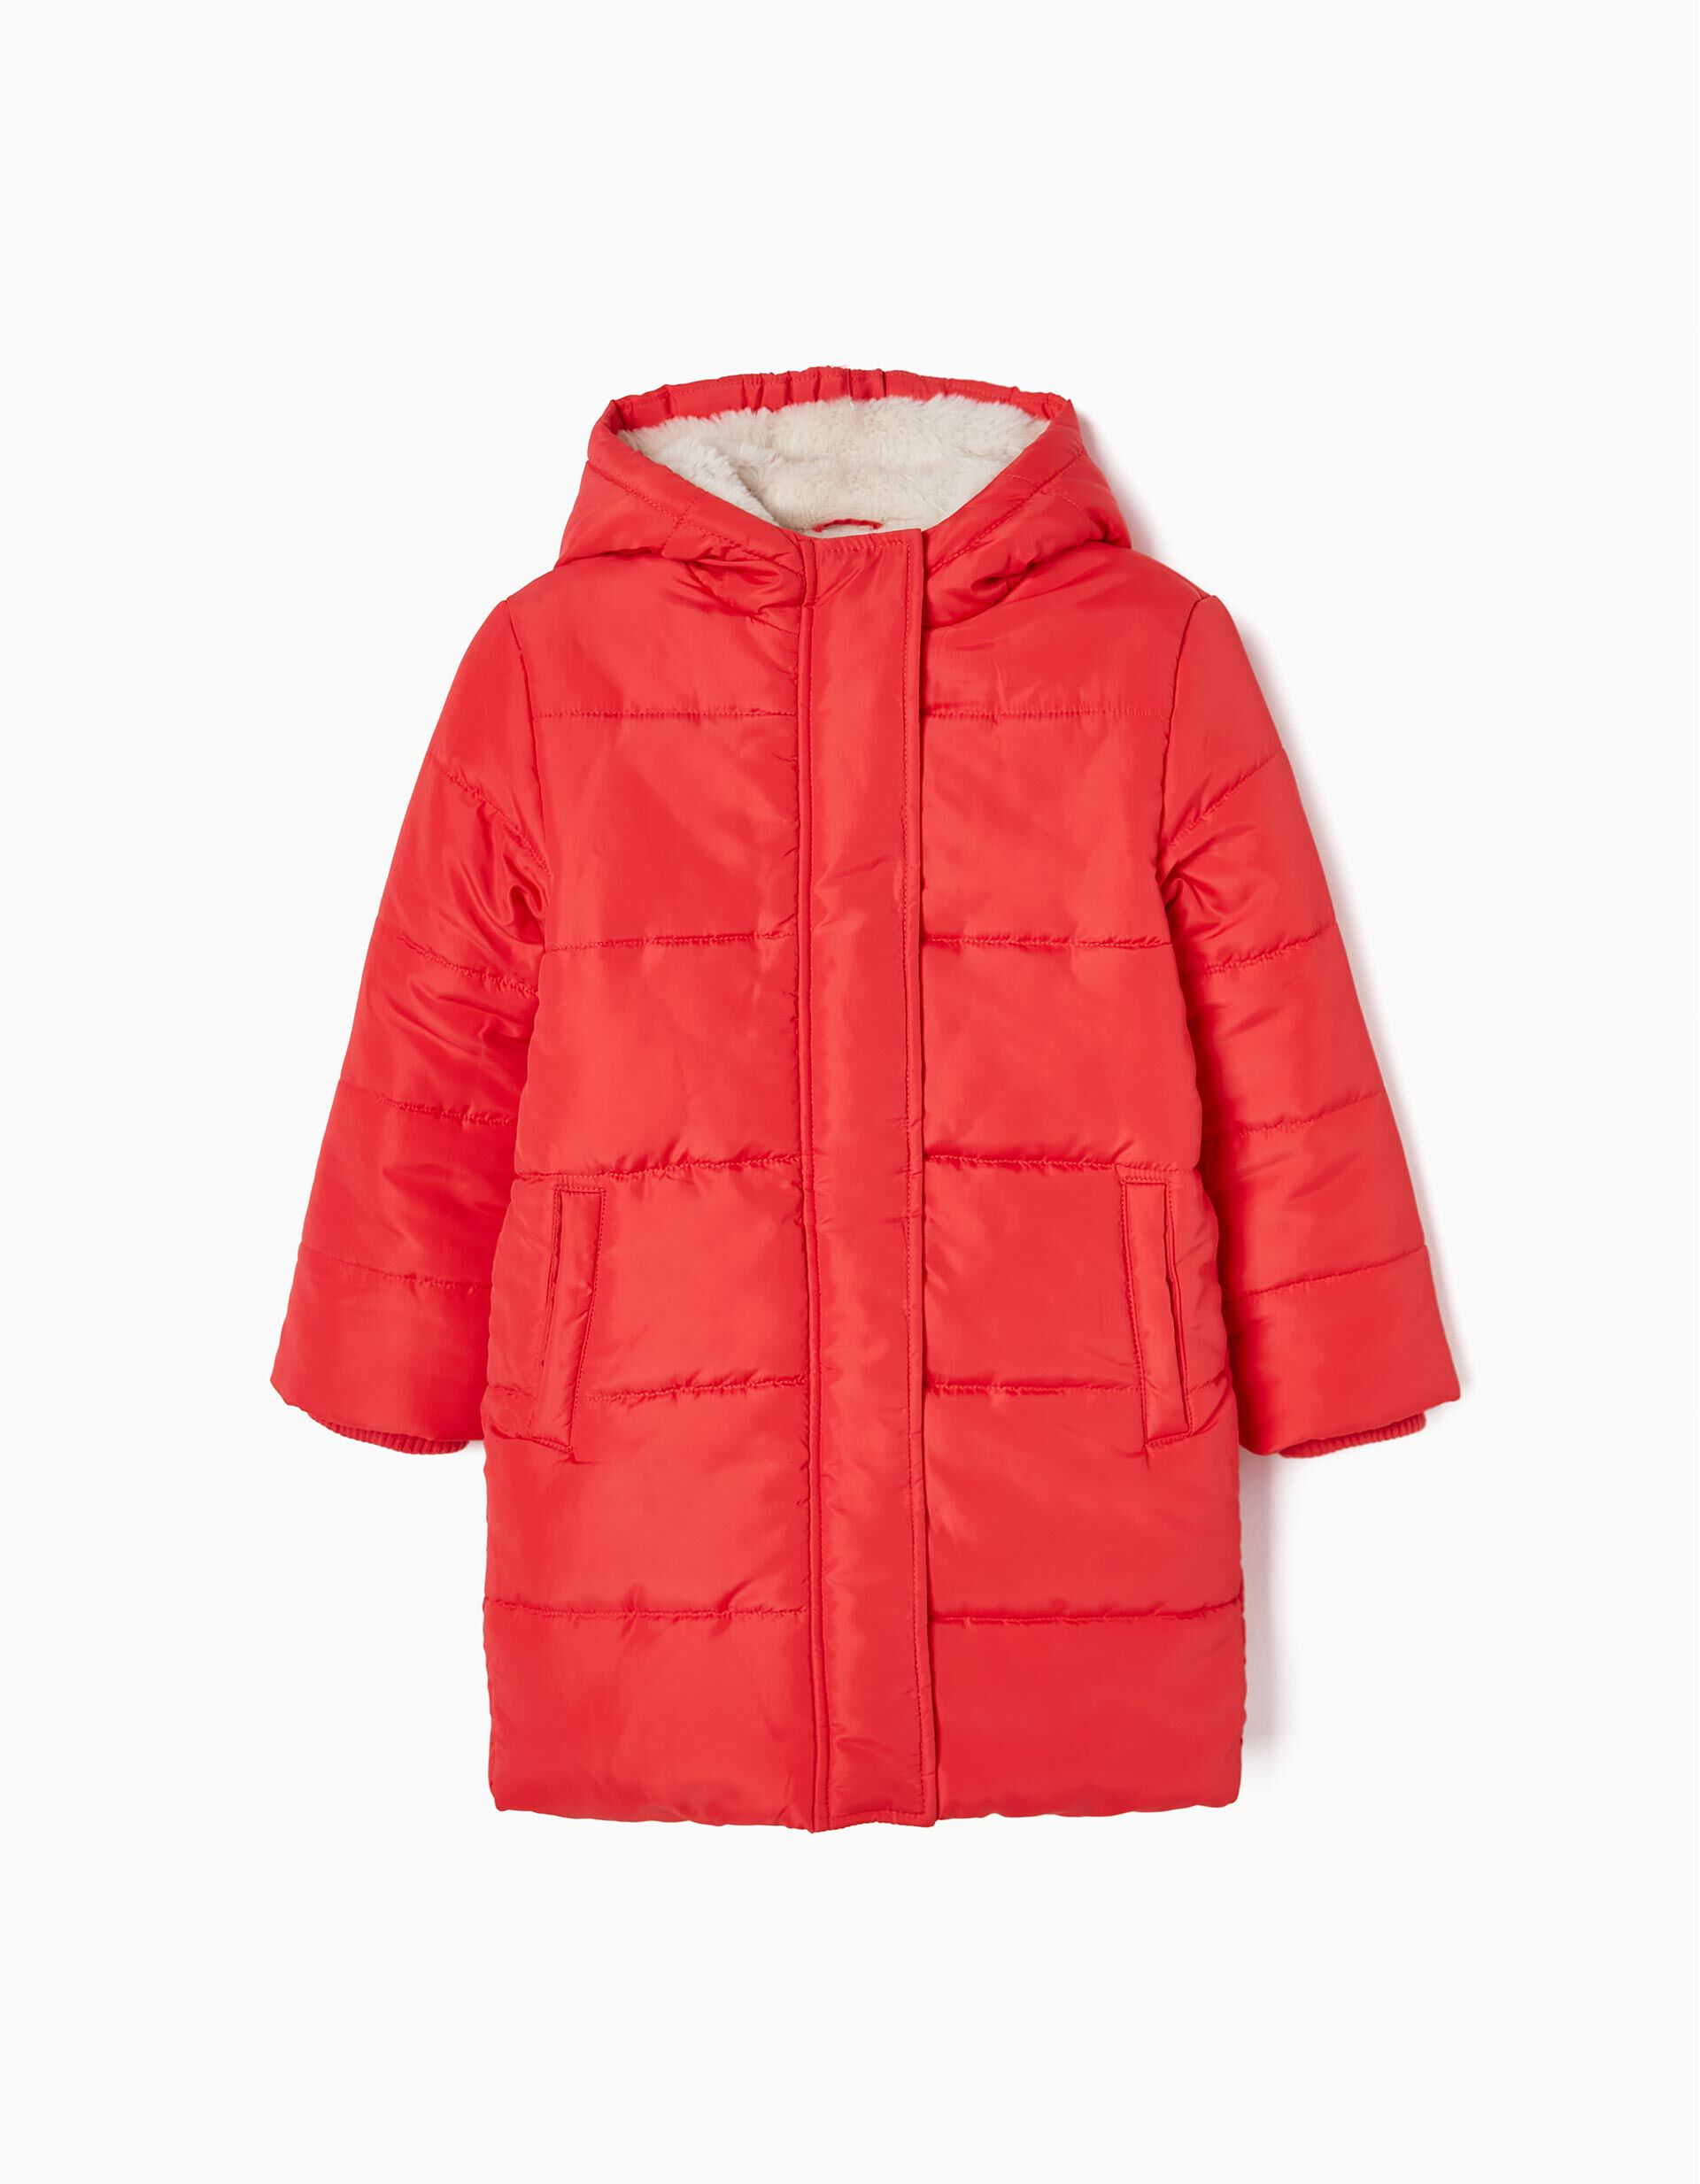 Girls Puffa Coat Jacket Quilted Hooded School Clothing with Faux Fur Hood Age of 5-14 MILEEO Girls Coat 